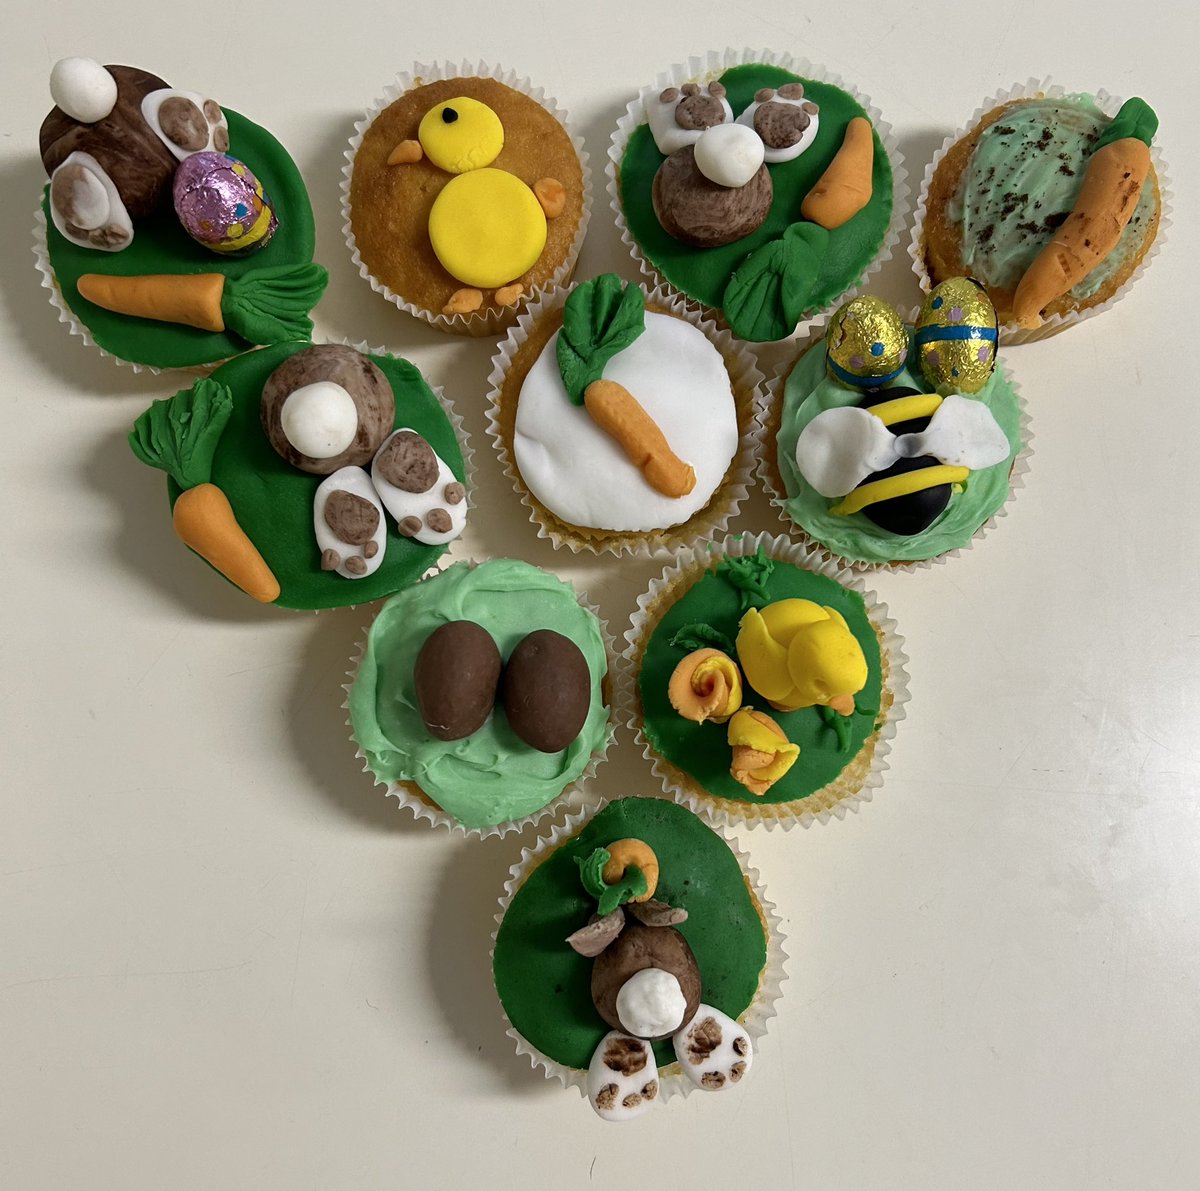 Today we've been making Easter cupcakes! Carrots, flowers and bunnies galore! 🐣🧁🐰

#TeamNRU #yummytreats 
#HappyEaster